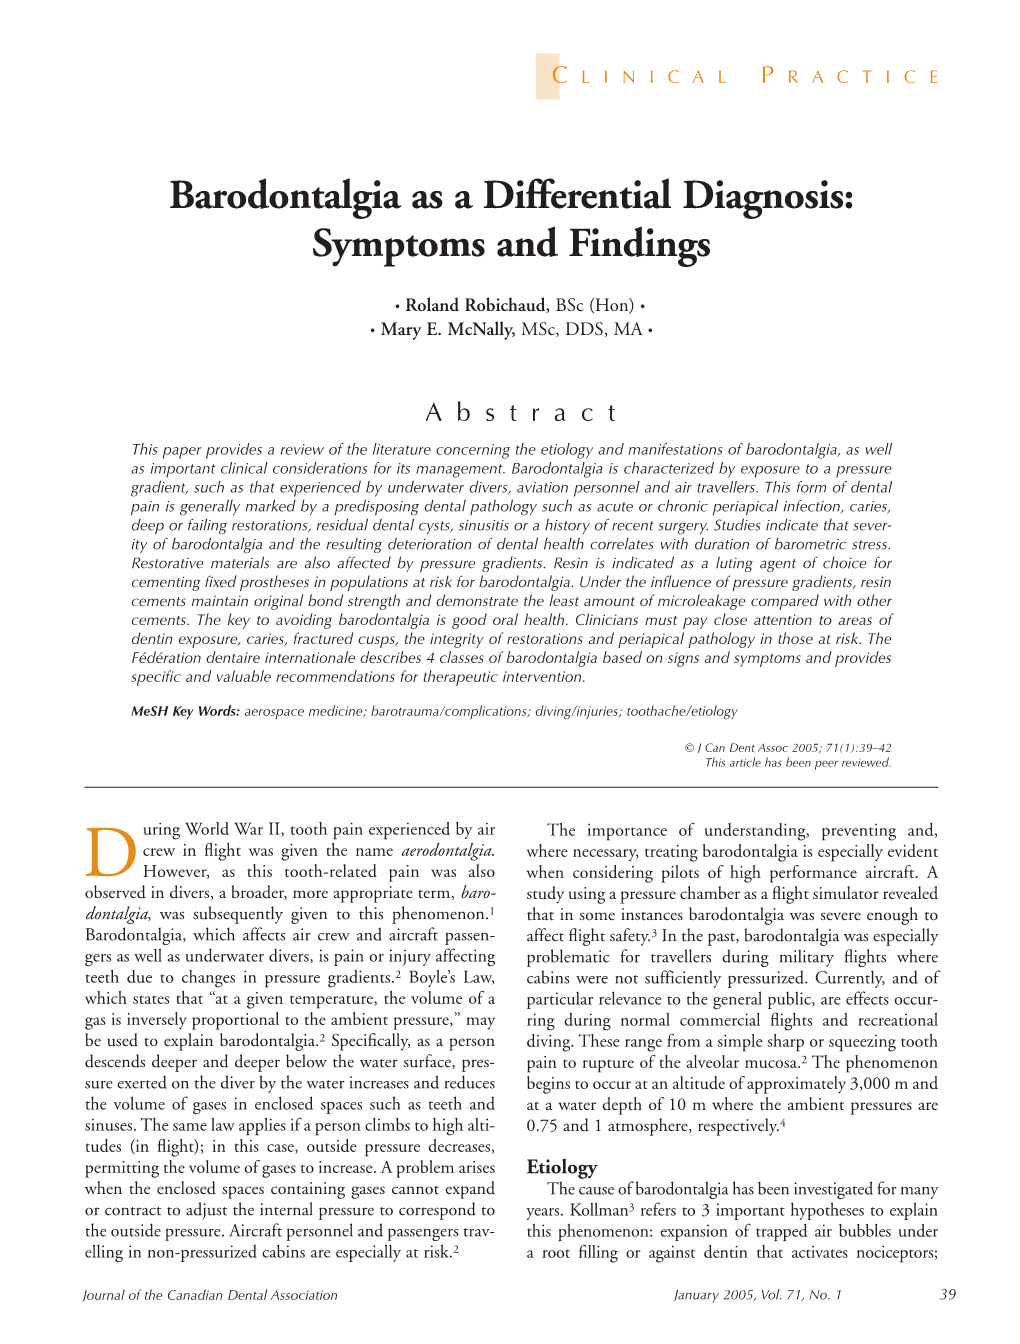 Barodontalgia As a Differential Diagnosis: Symptoms and Findings